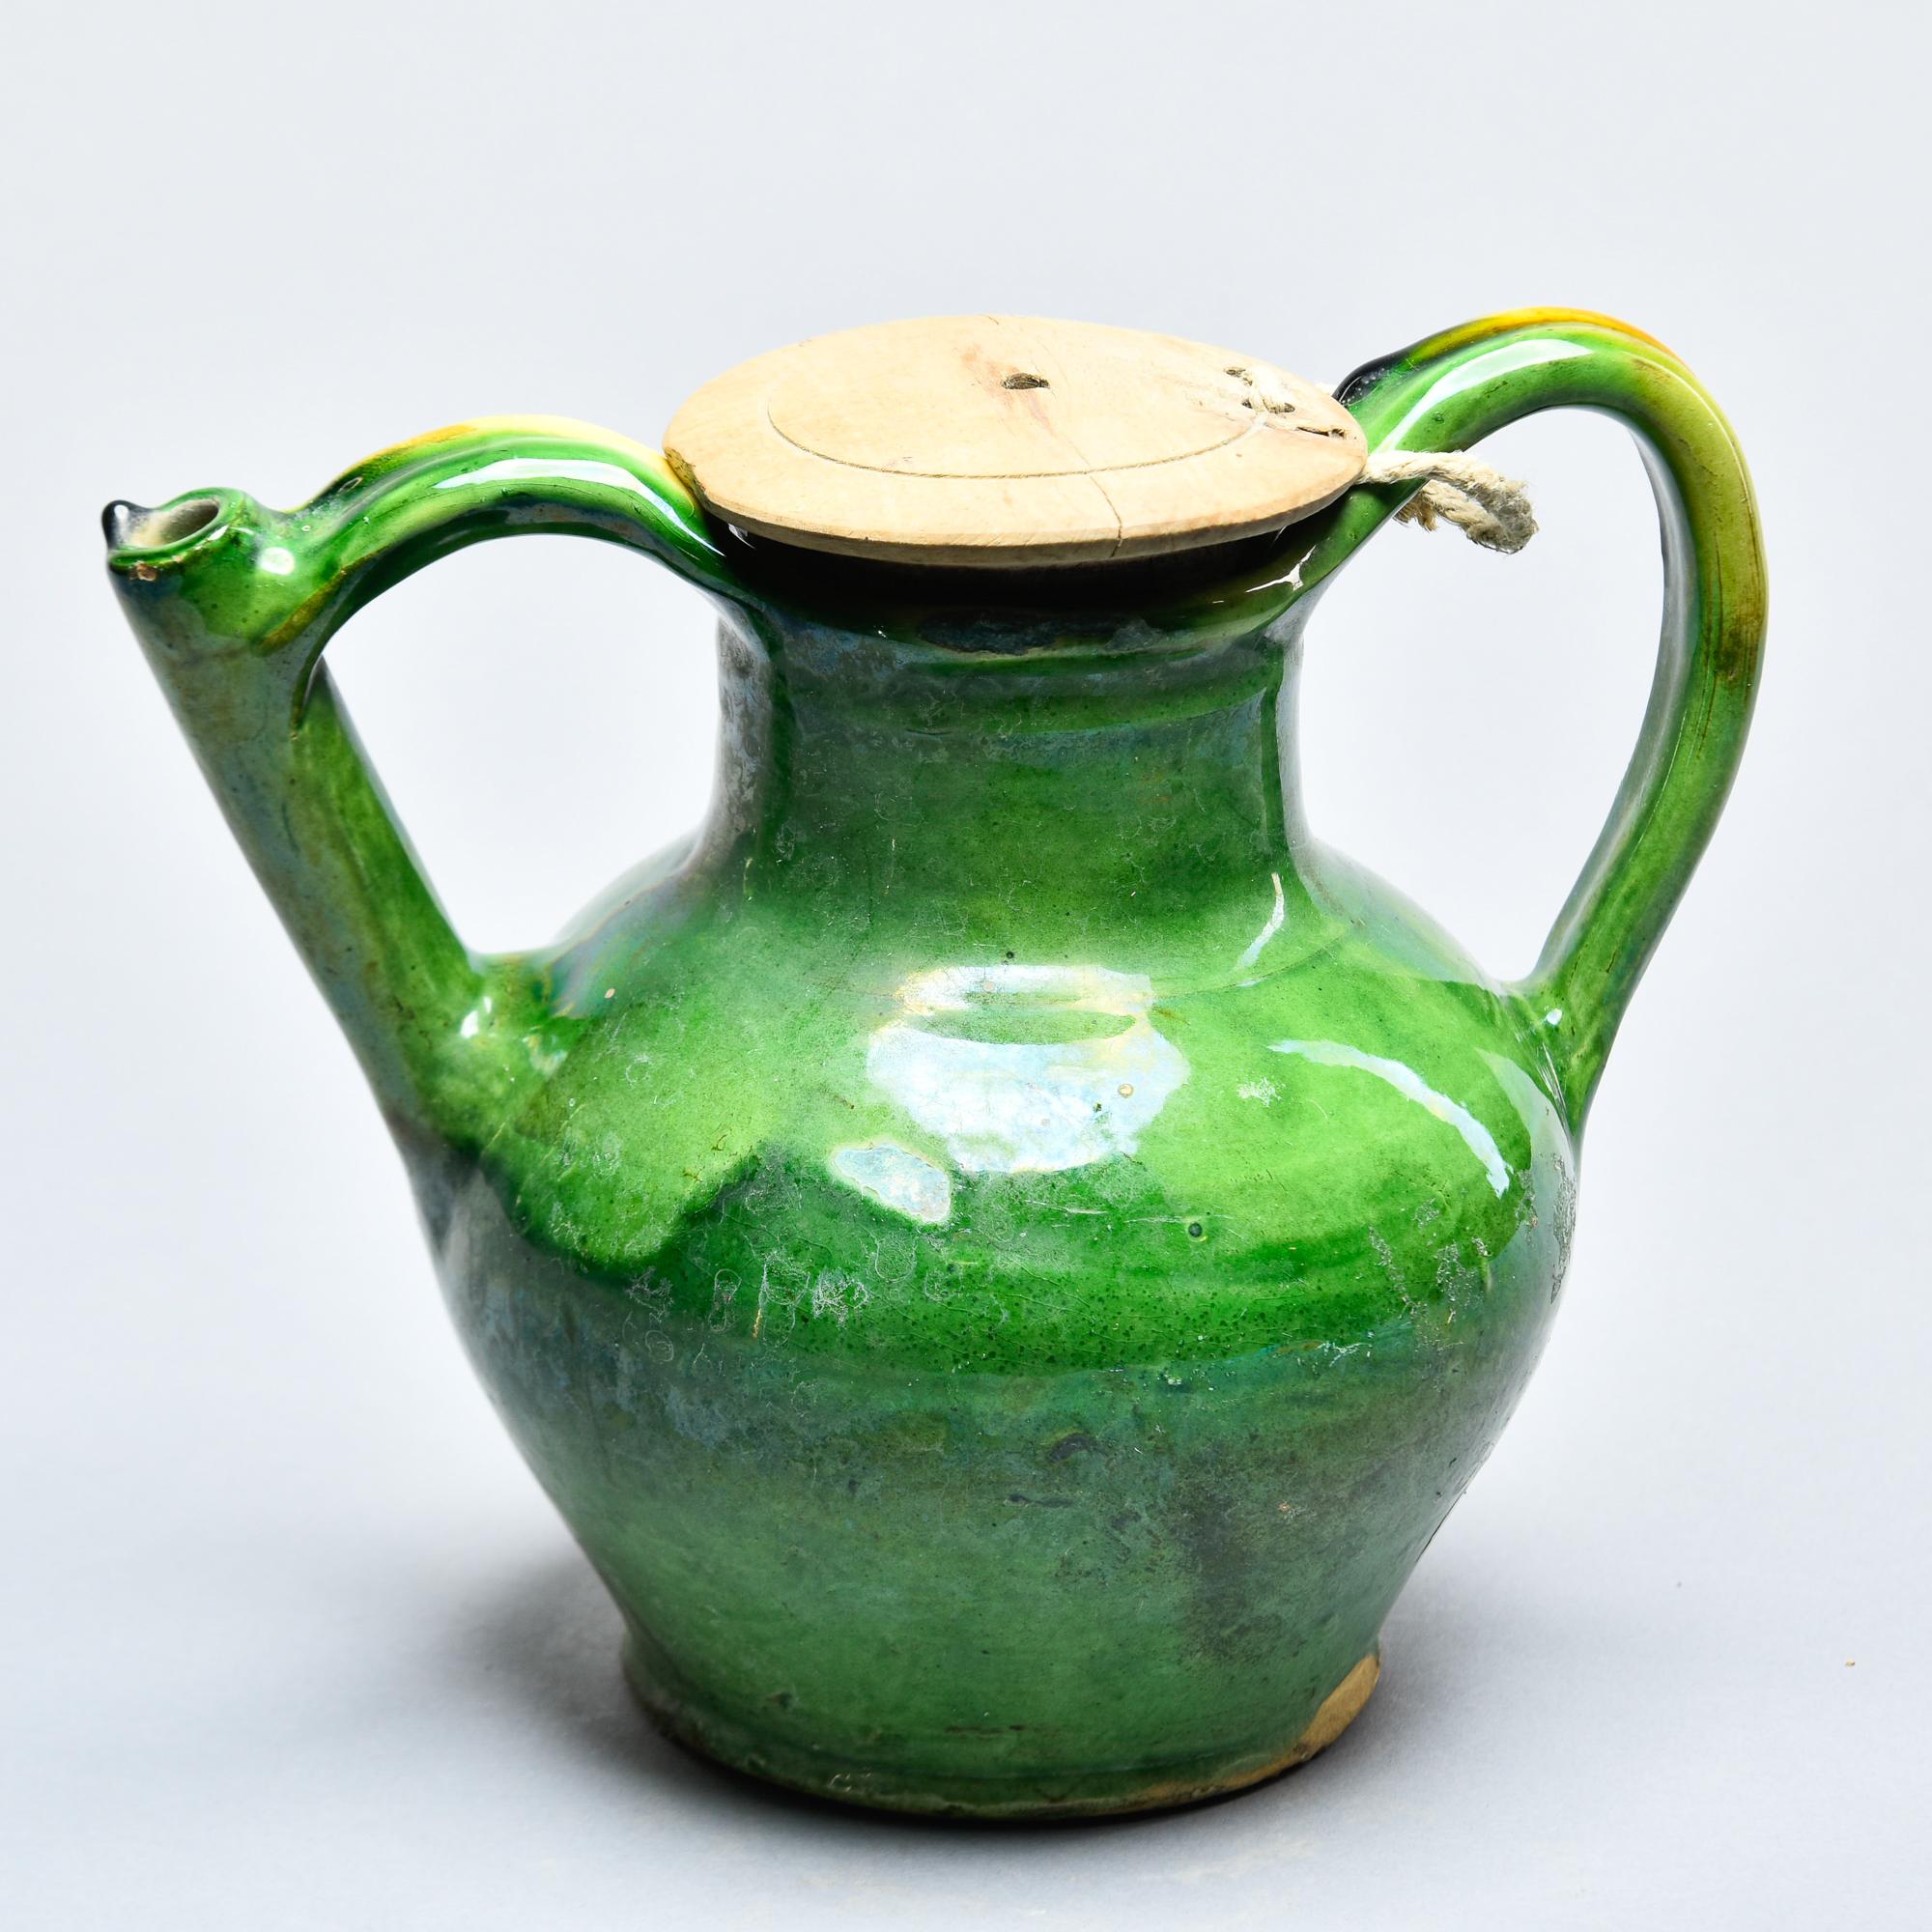 Found in France, this green glazed ceramic water jug dates from approximately 1910. Classic provincial amphora shape with one of the handles incorporating a functional pouring/filling spout. It is very unusual to find these vessels with their